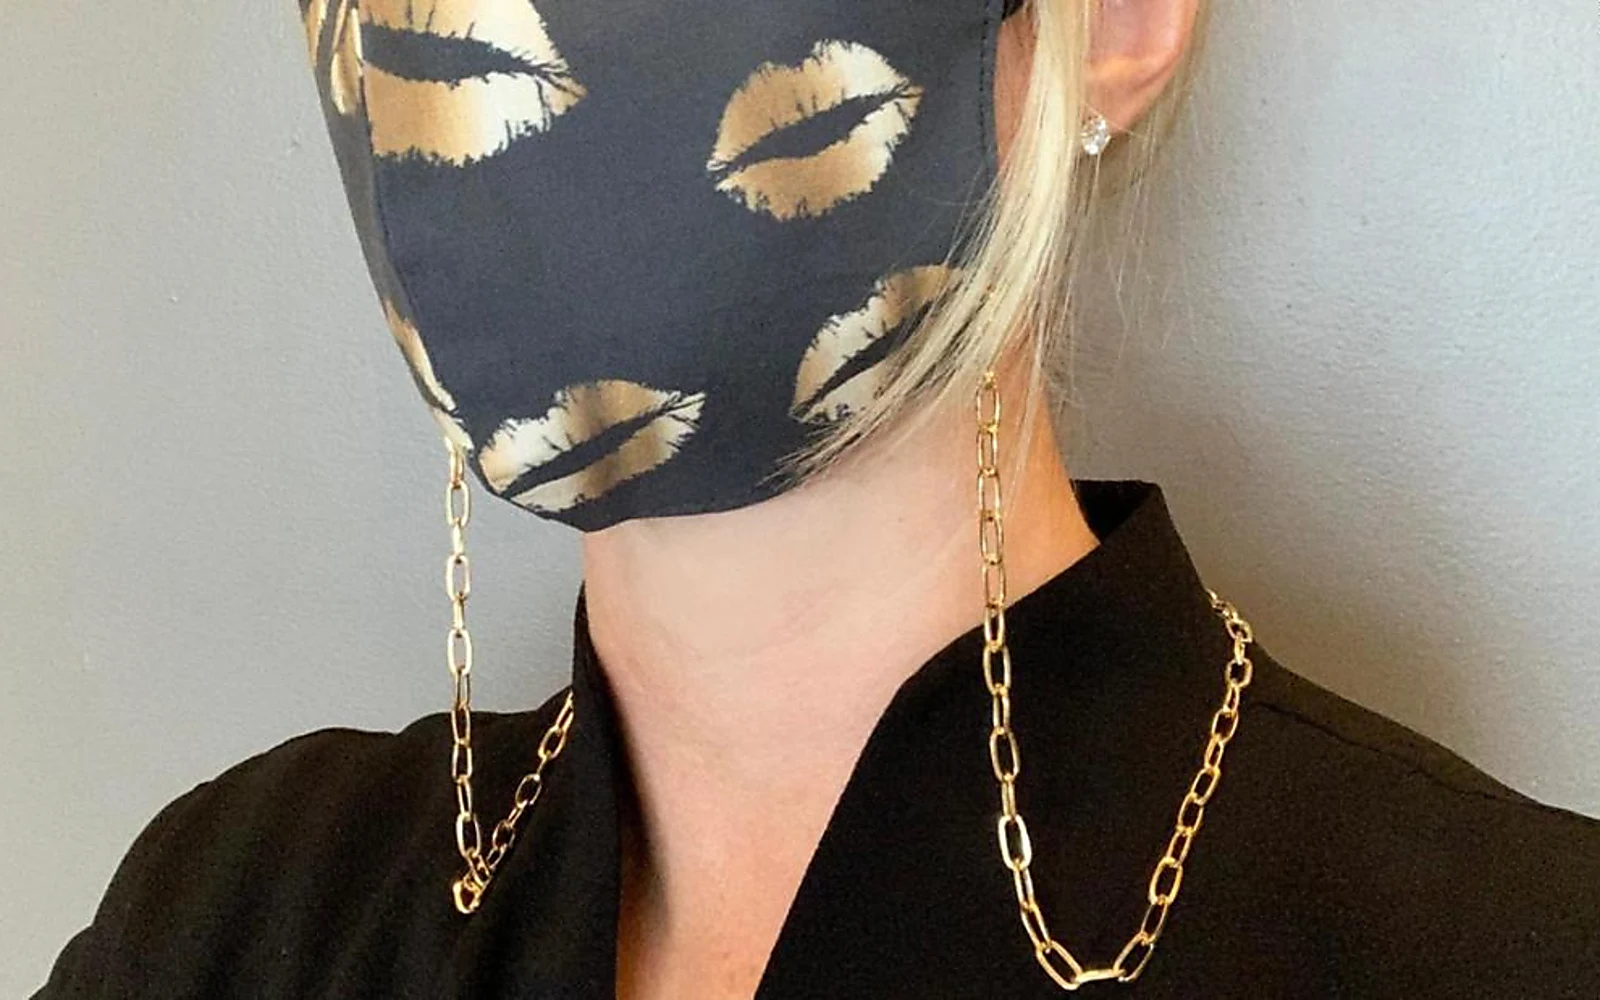 Introducing face mask chains, your new favorite everyday accessory